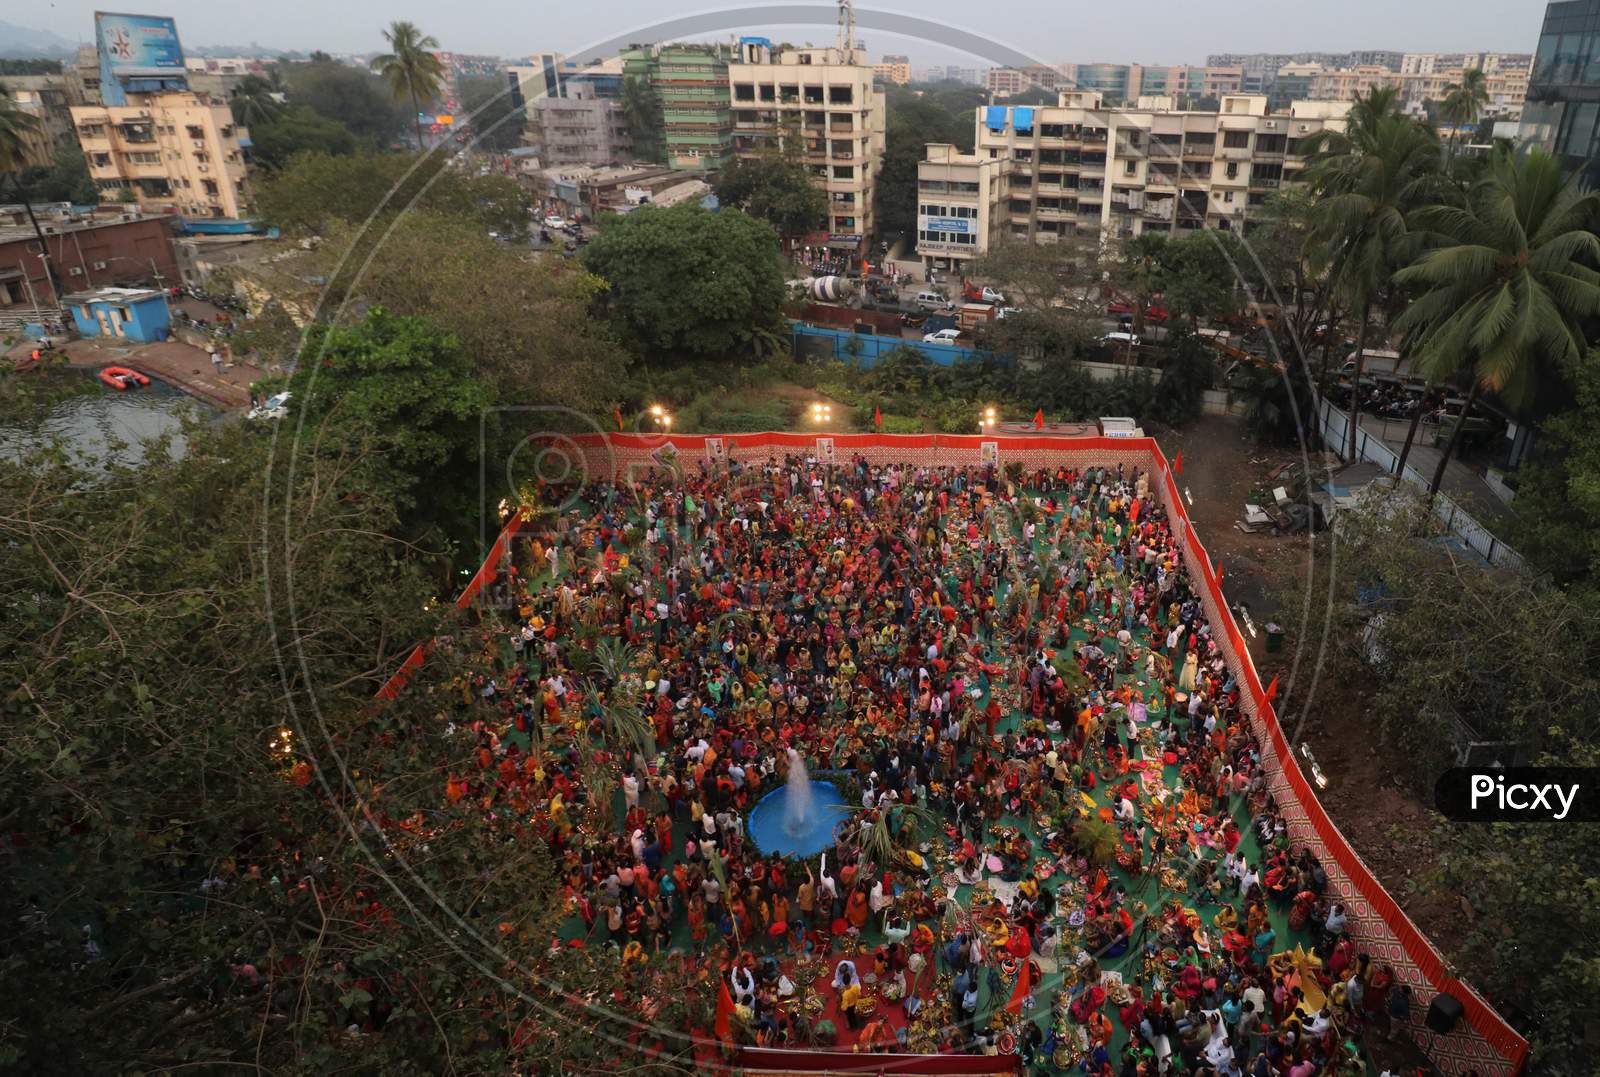 Hindu devotees worship the Sun god in an artificial pond during the religious festival of Chhath Puja, amid the spread of the coronavirus disease (COVID-19), in Mumbai, India on November 20, 2020.